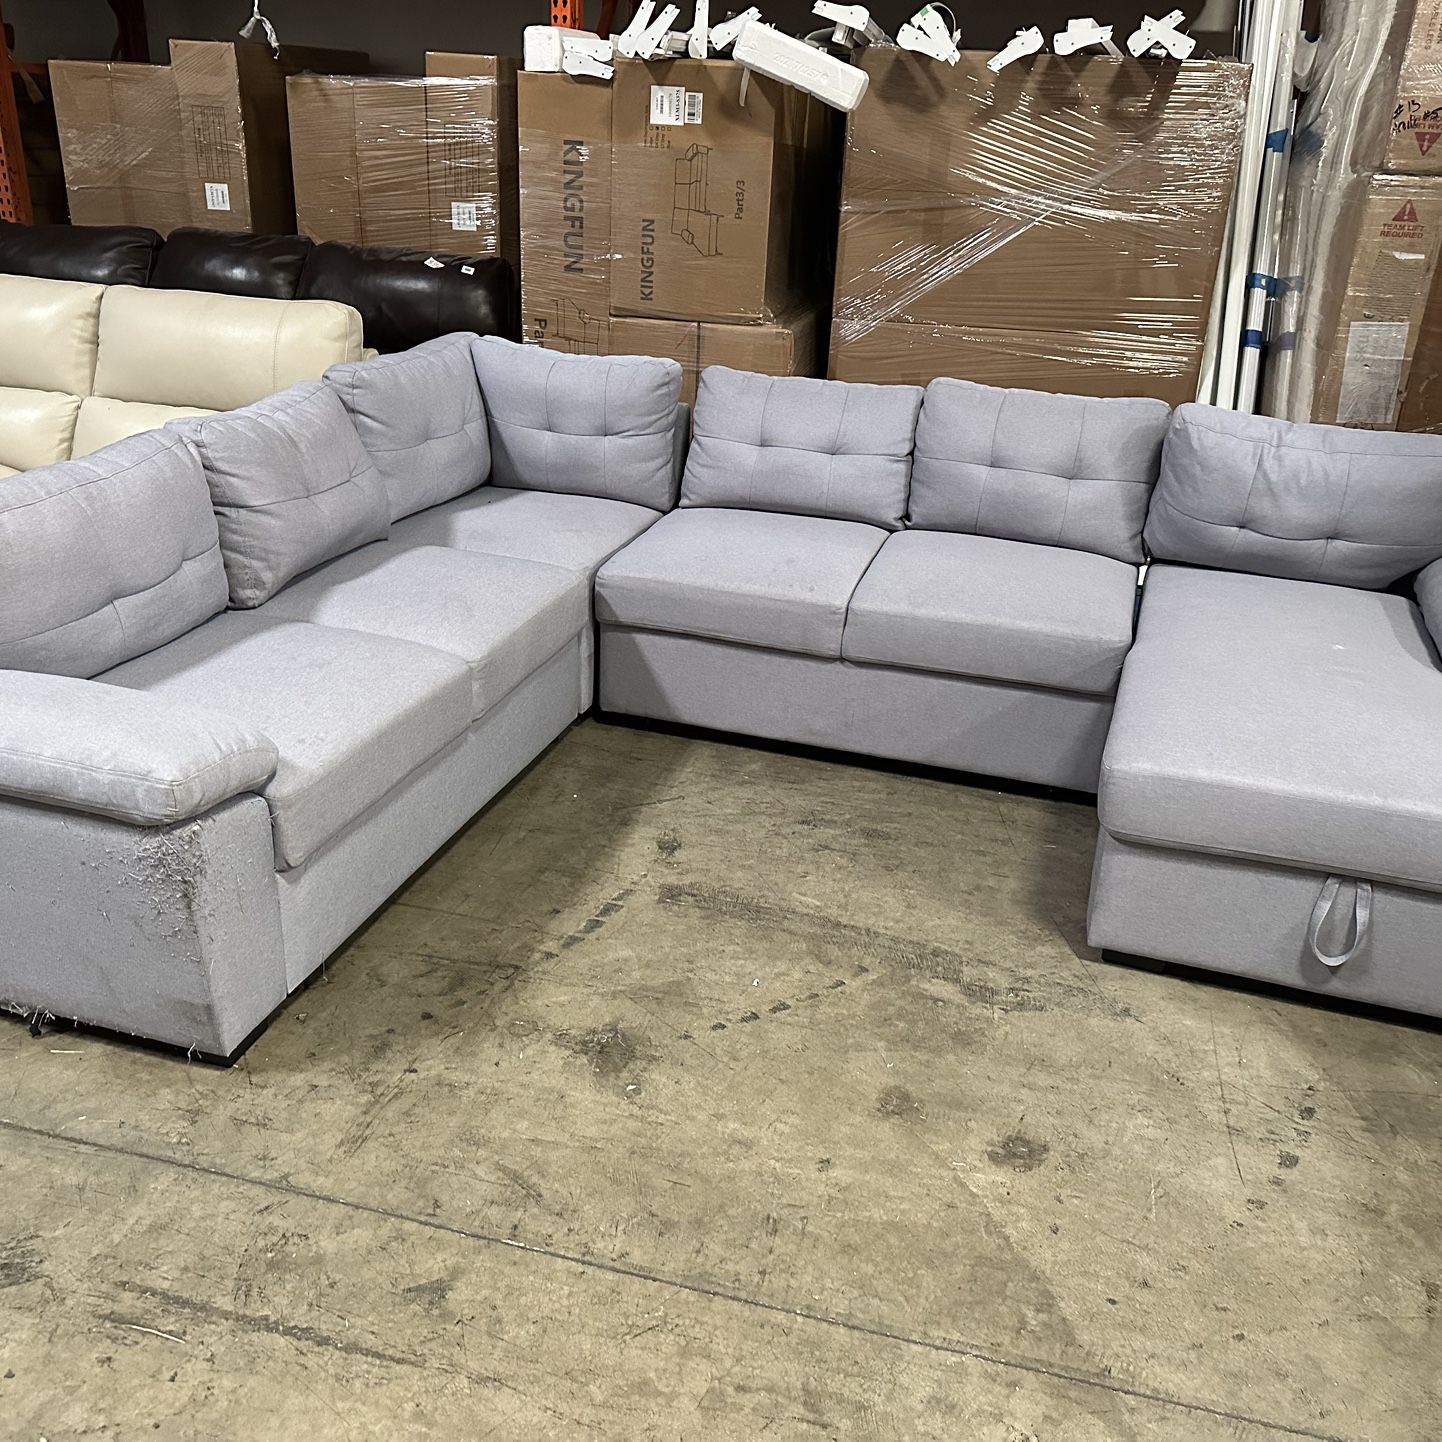 118” Wide Fabric Sectional: $250